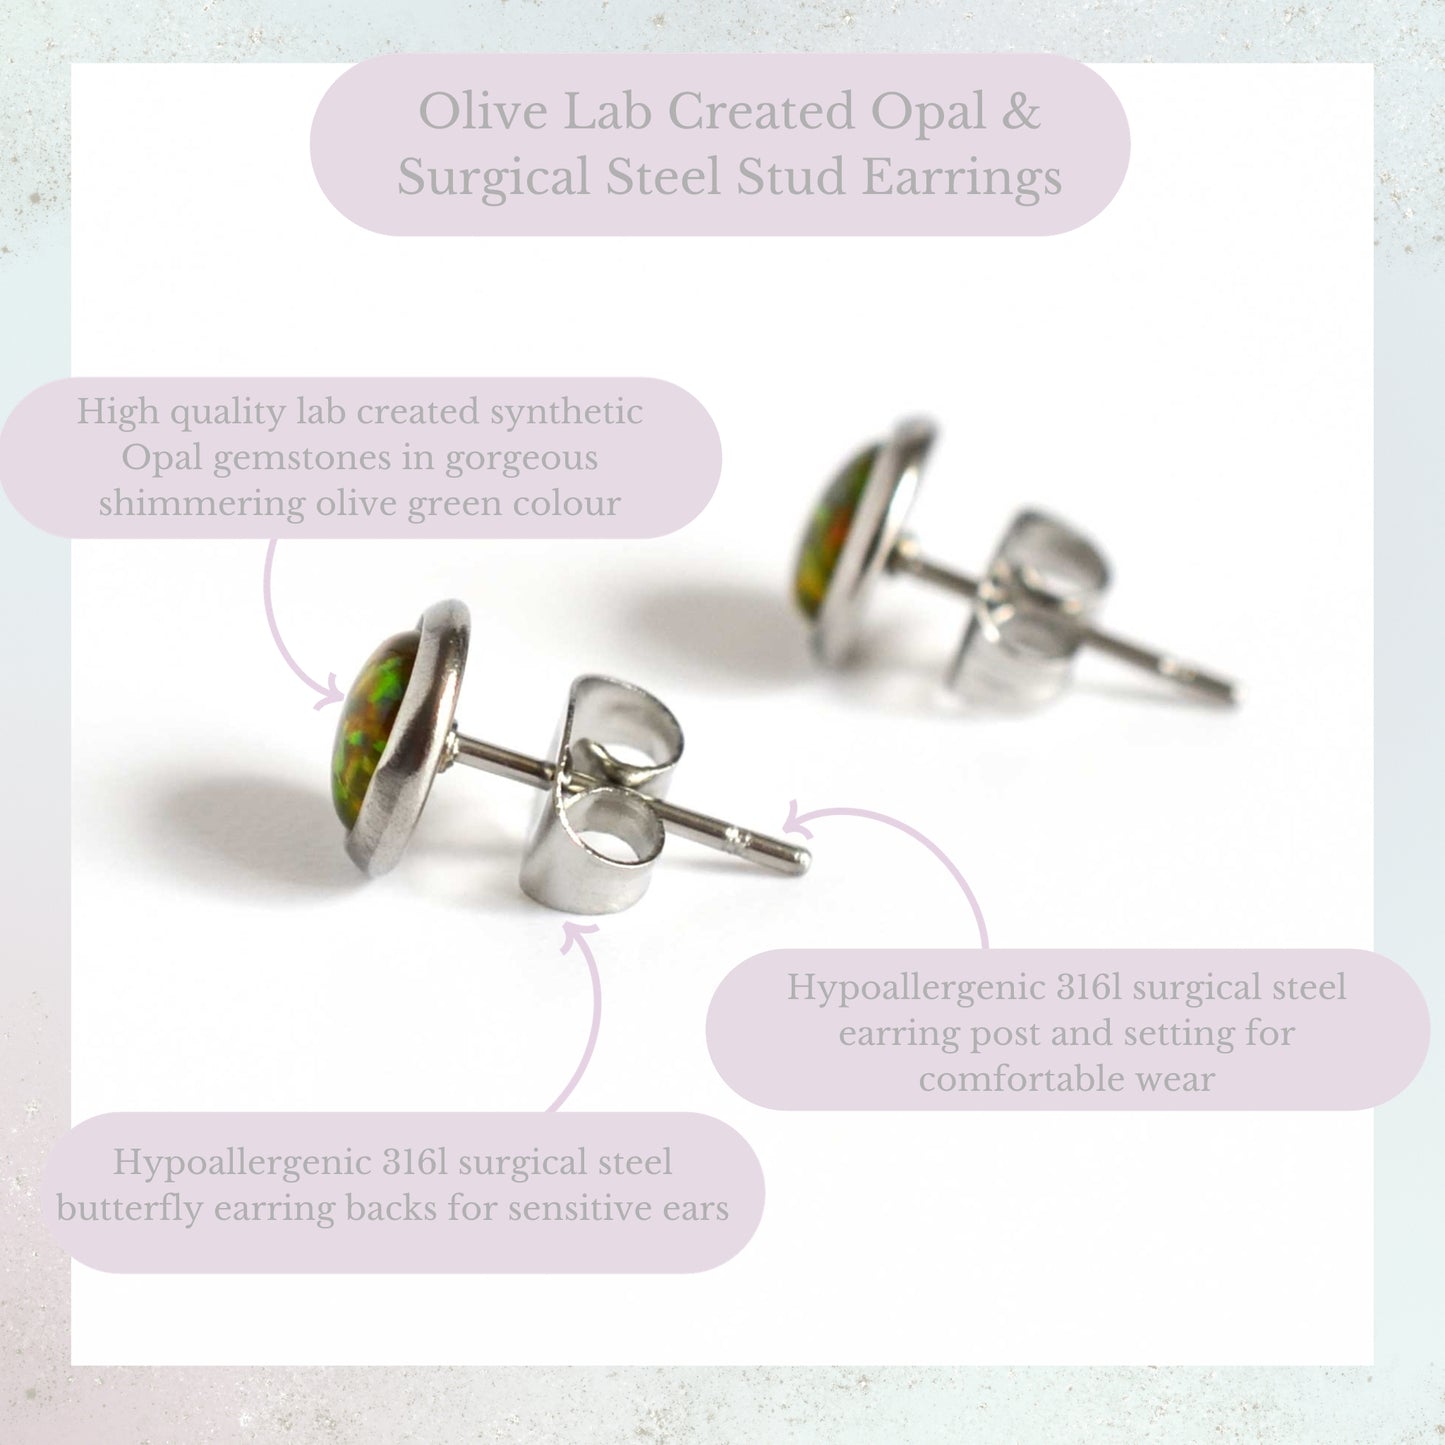 Olive Green Lab Created Opal & Surgical Steel Stud Earrings Product Information Graphic